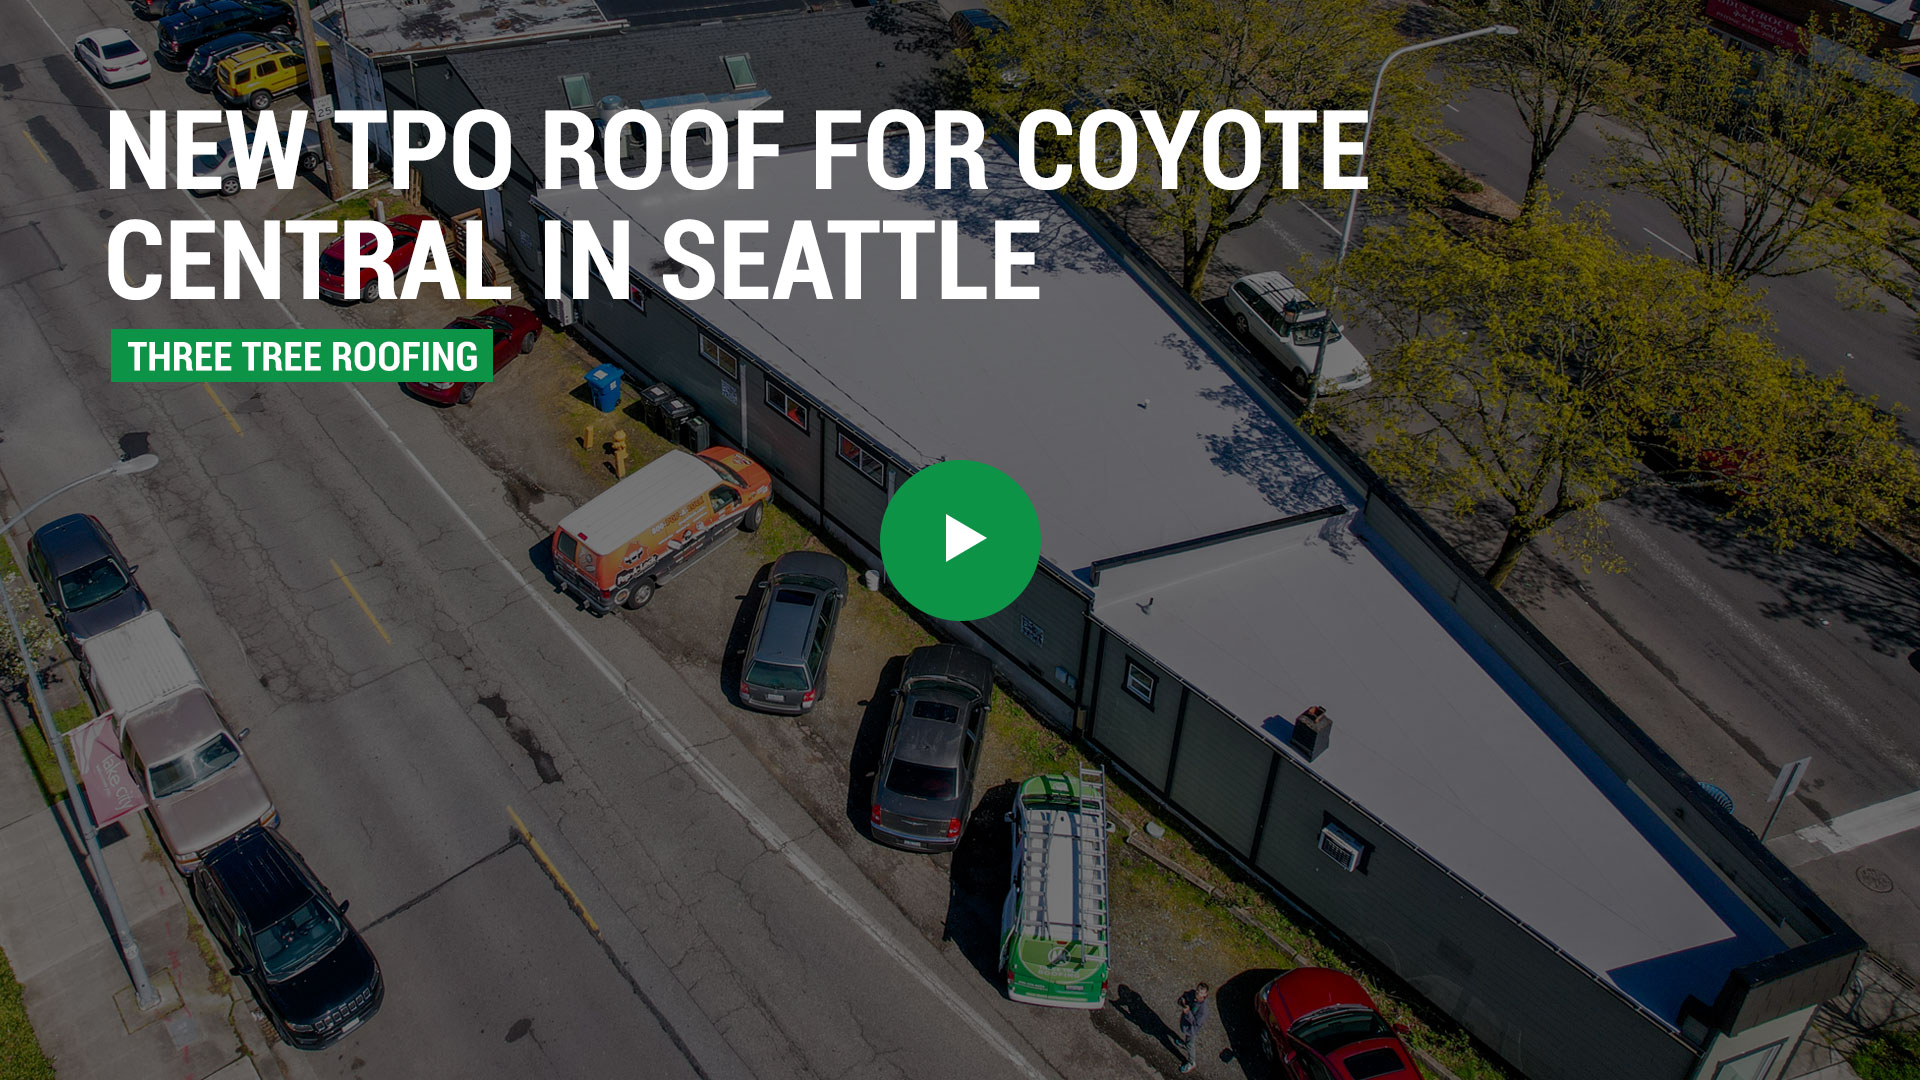 Roofing Project: New Flat TPO Roof For Coyote Central In Seattle